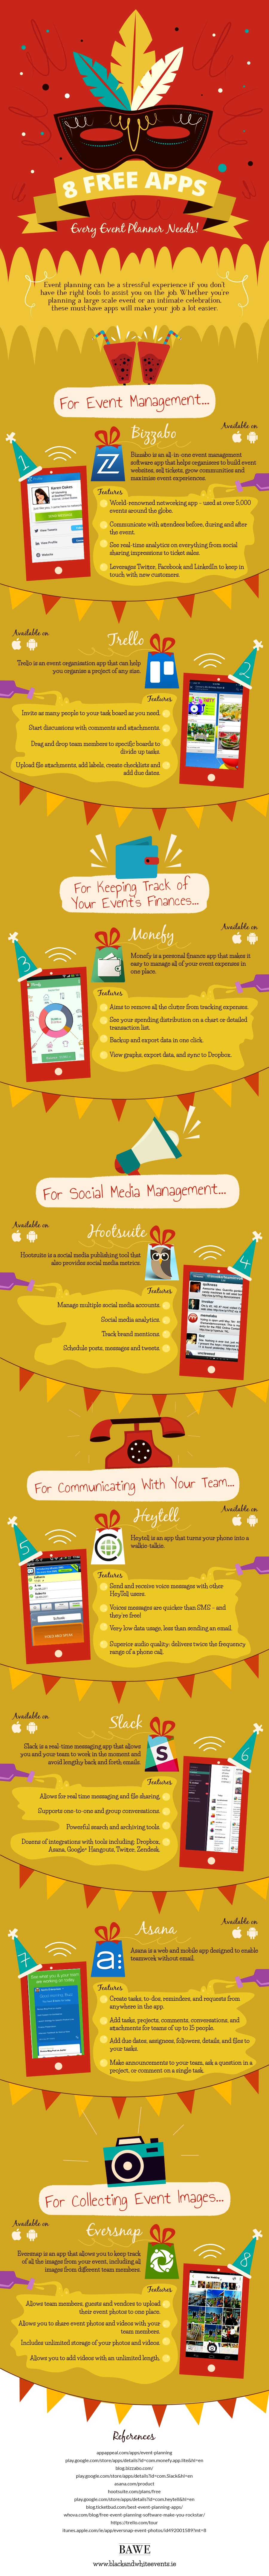 Infographic - 8 Free Apps Every Event Planner Needs